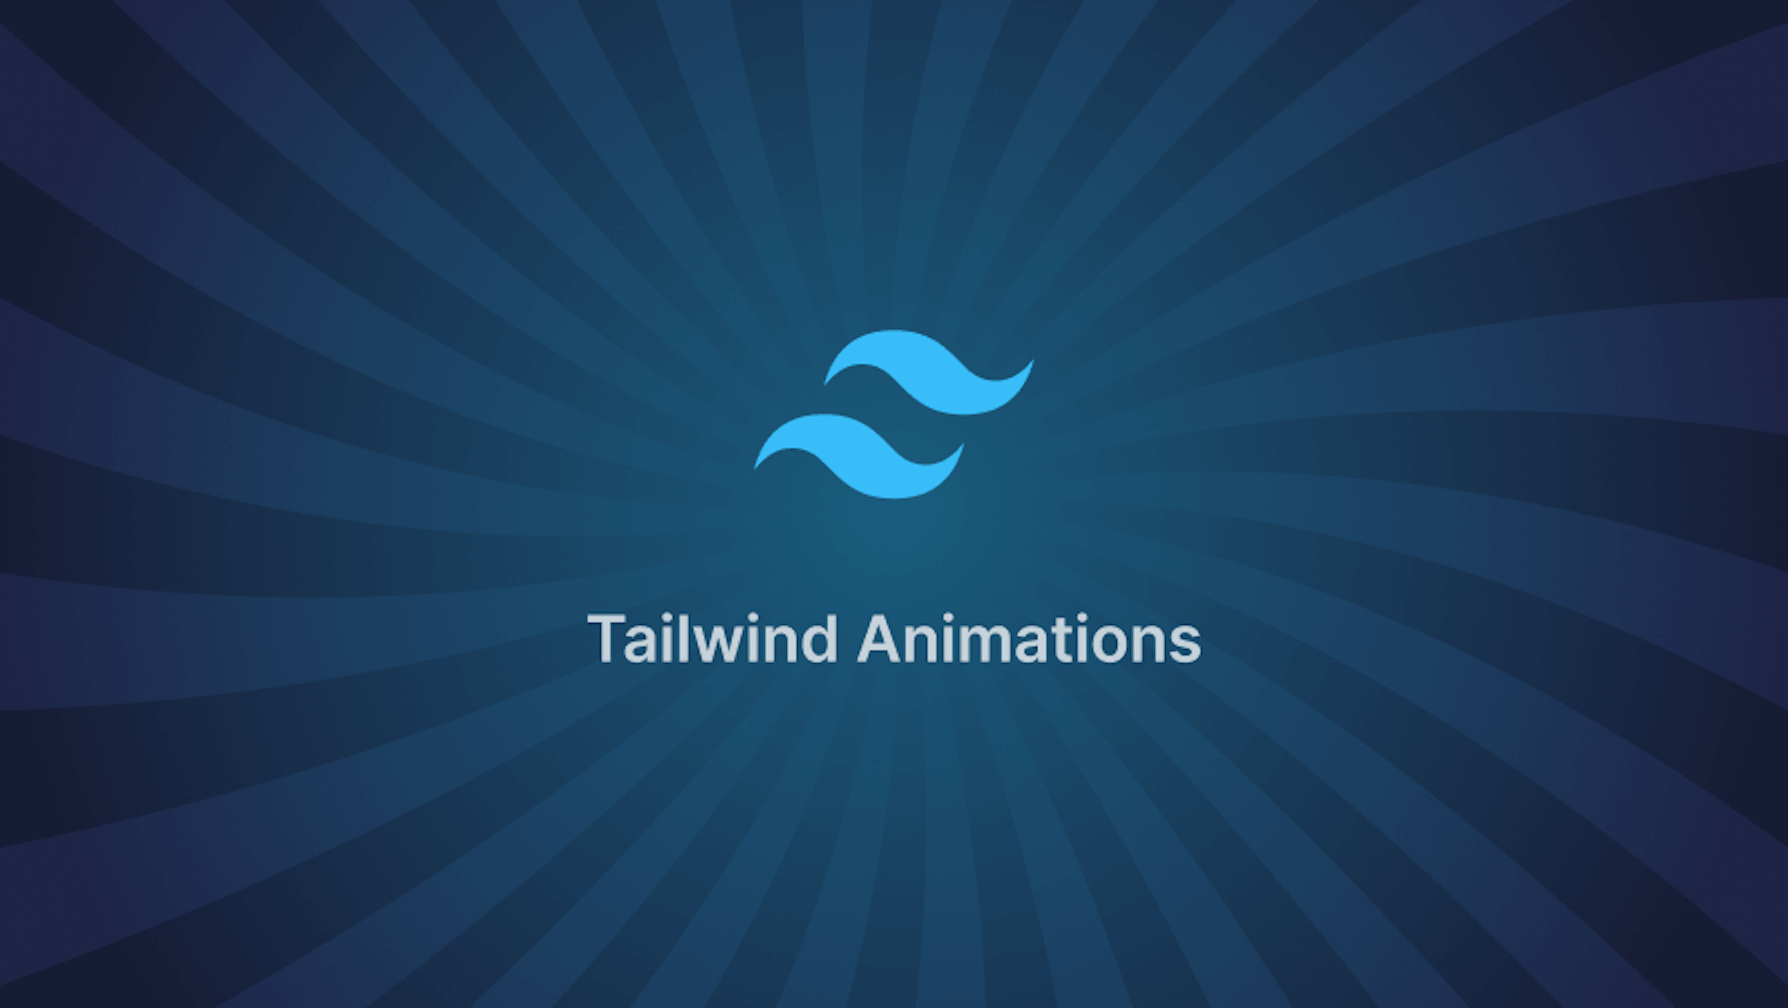 Tailwind Animations with Examples